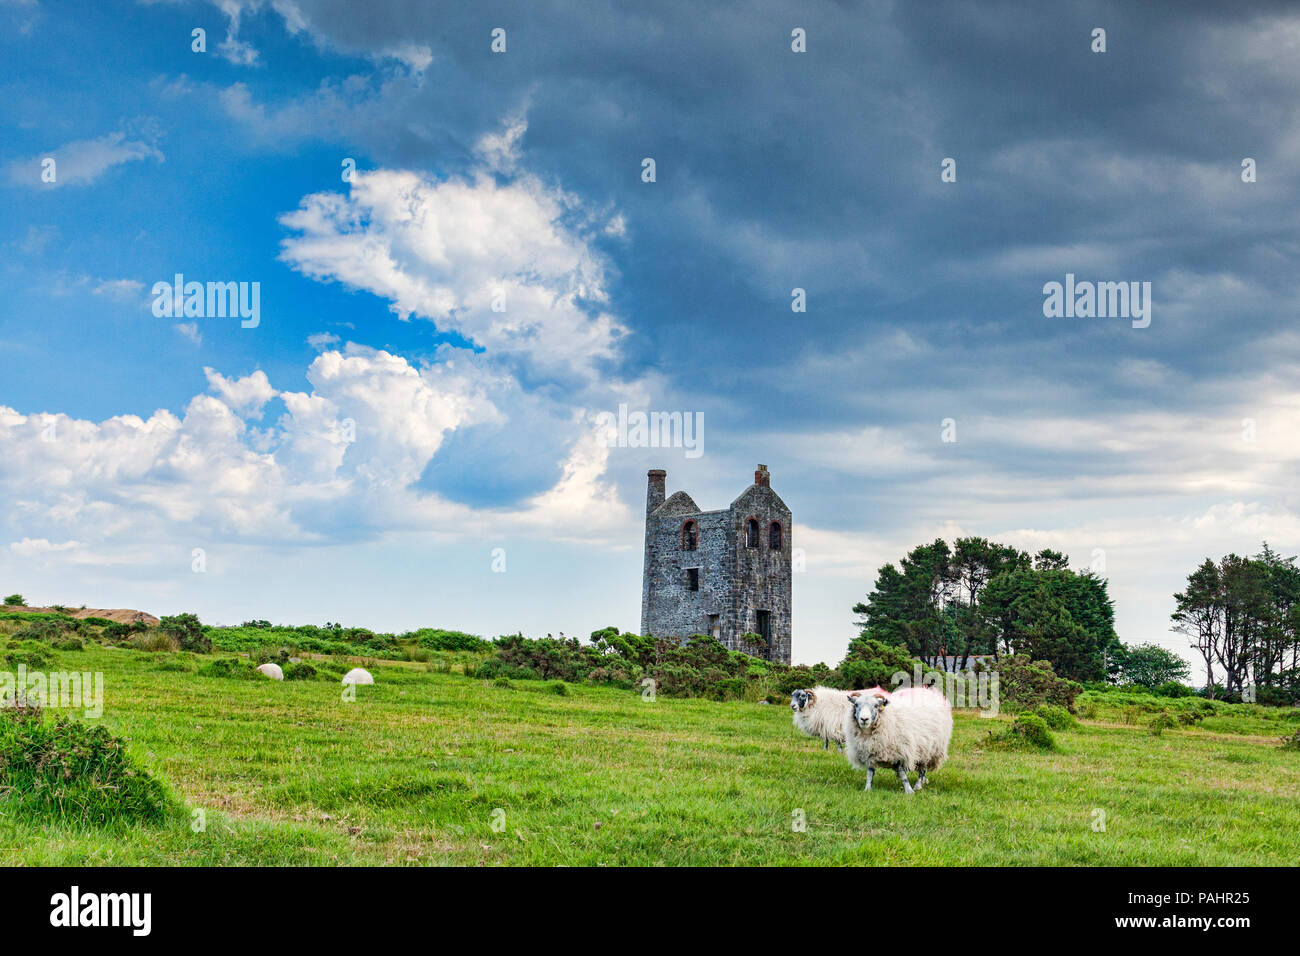 Dramatic storm clouds promise relief from the continuing heatwave on Bodmin Moor near Minions, the highest village in Cornwall, UK. Bodmin Moor has be Stock Photo